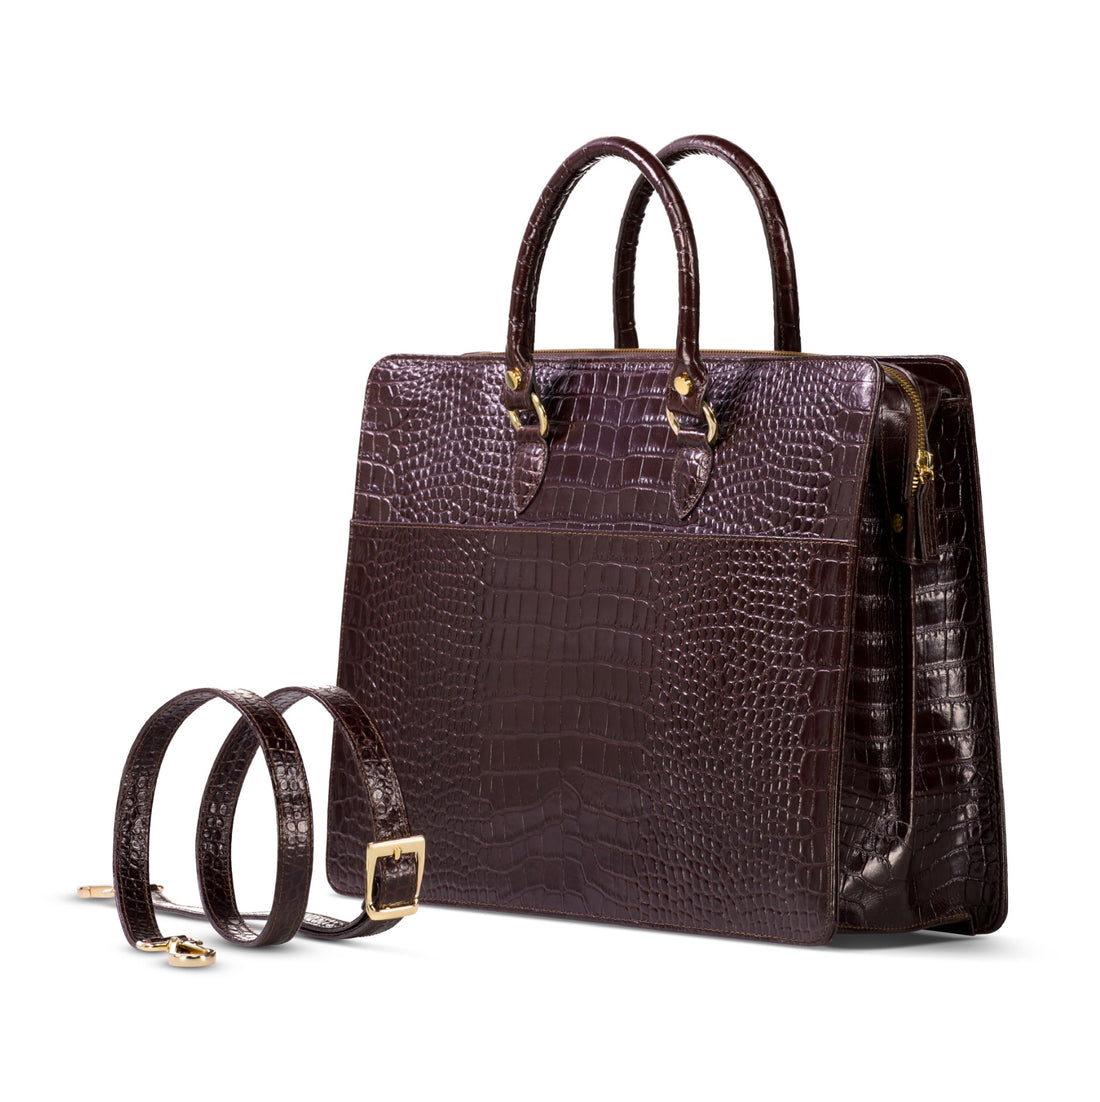 The Luna Briefcase - Chocolate Brown - Bags by Urbbana